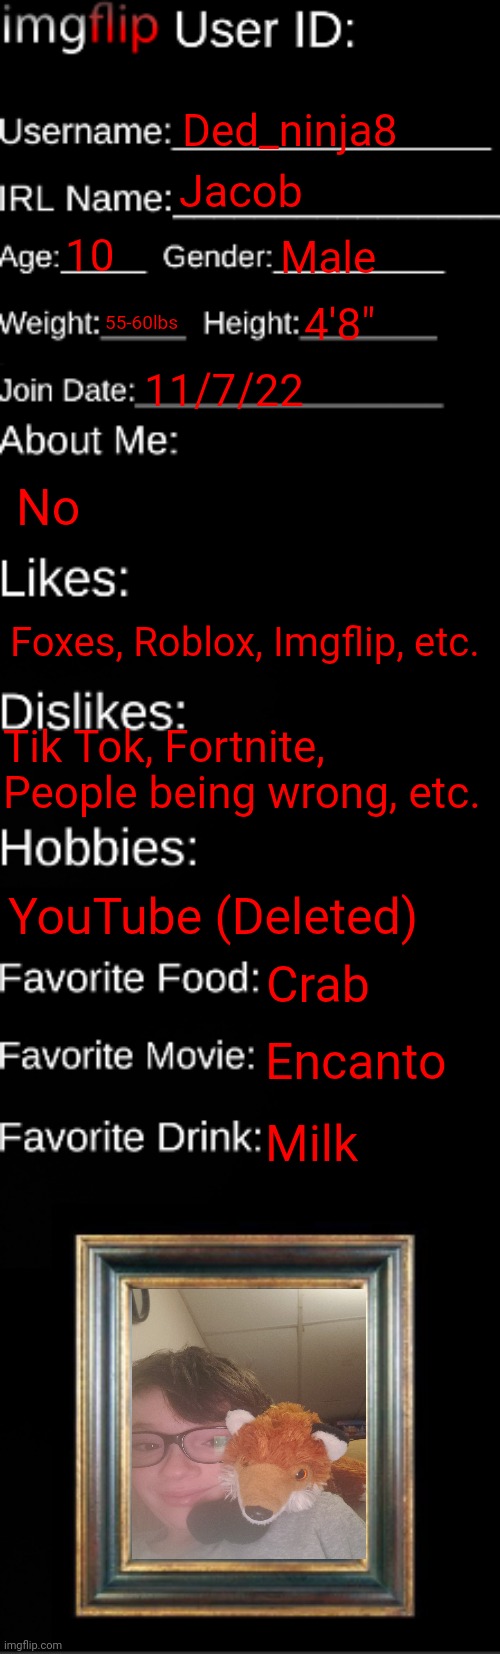 Y not | Ded_ninja8; Jacob; 10; Male; 55-60lbs; 4'8"; 11/7/22; No; Foxes, Roblox, Imgflip, etc. Tik Tok, Fortnite, People being wrong, etc. YouTube (Deleted); Crab; Encanto; Milk | image tagged in imgflip id card | made w/ Imgflip meme maker